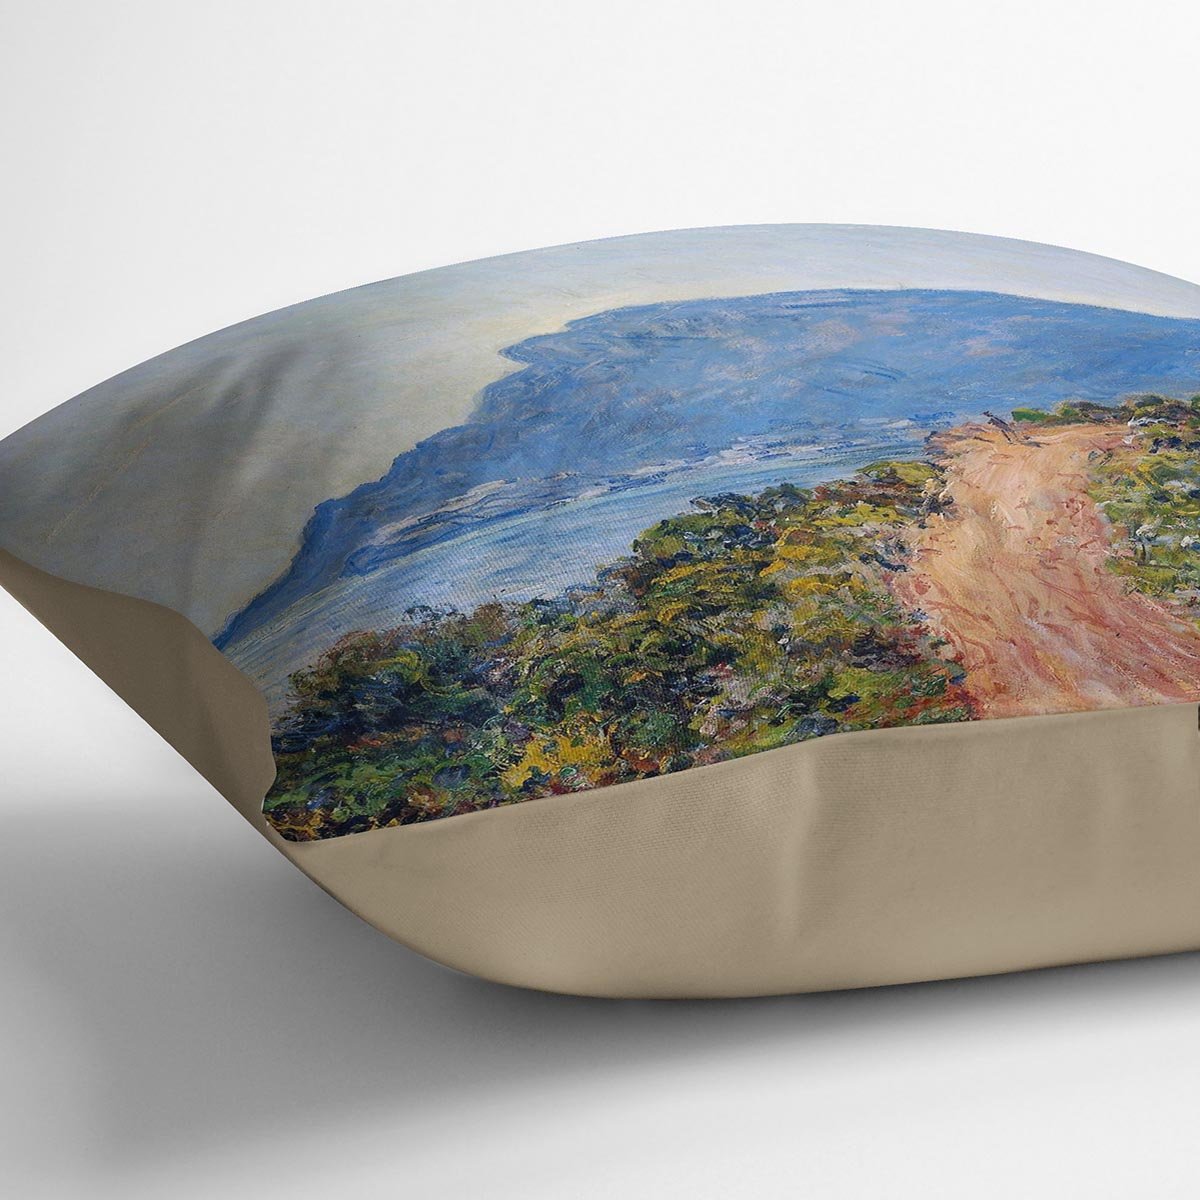 A coastal view with a bay by Monet Throw Pillow